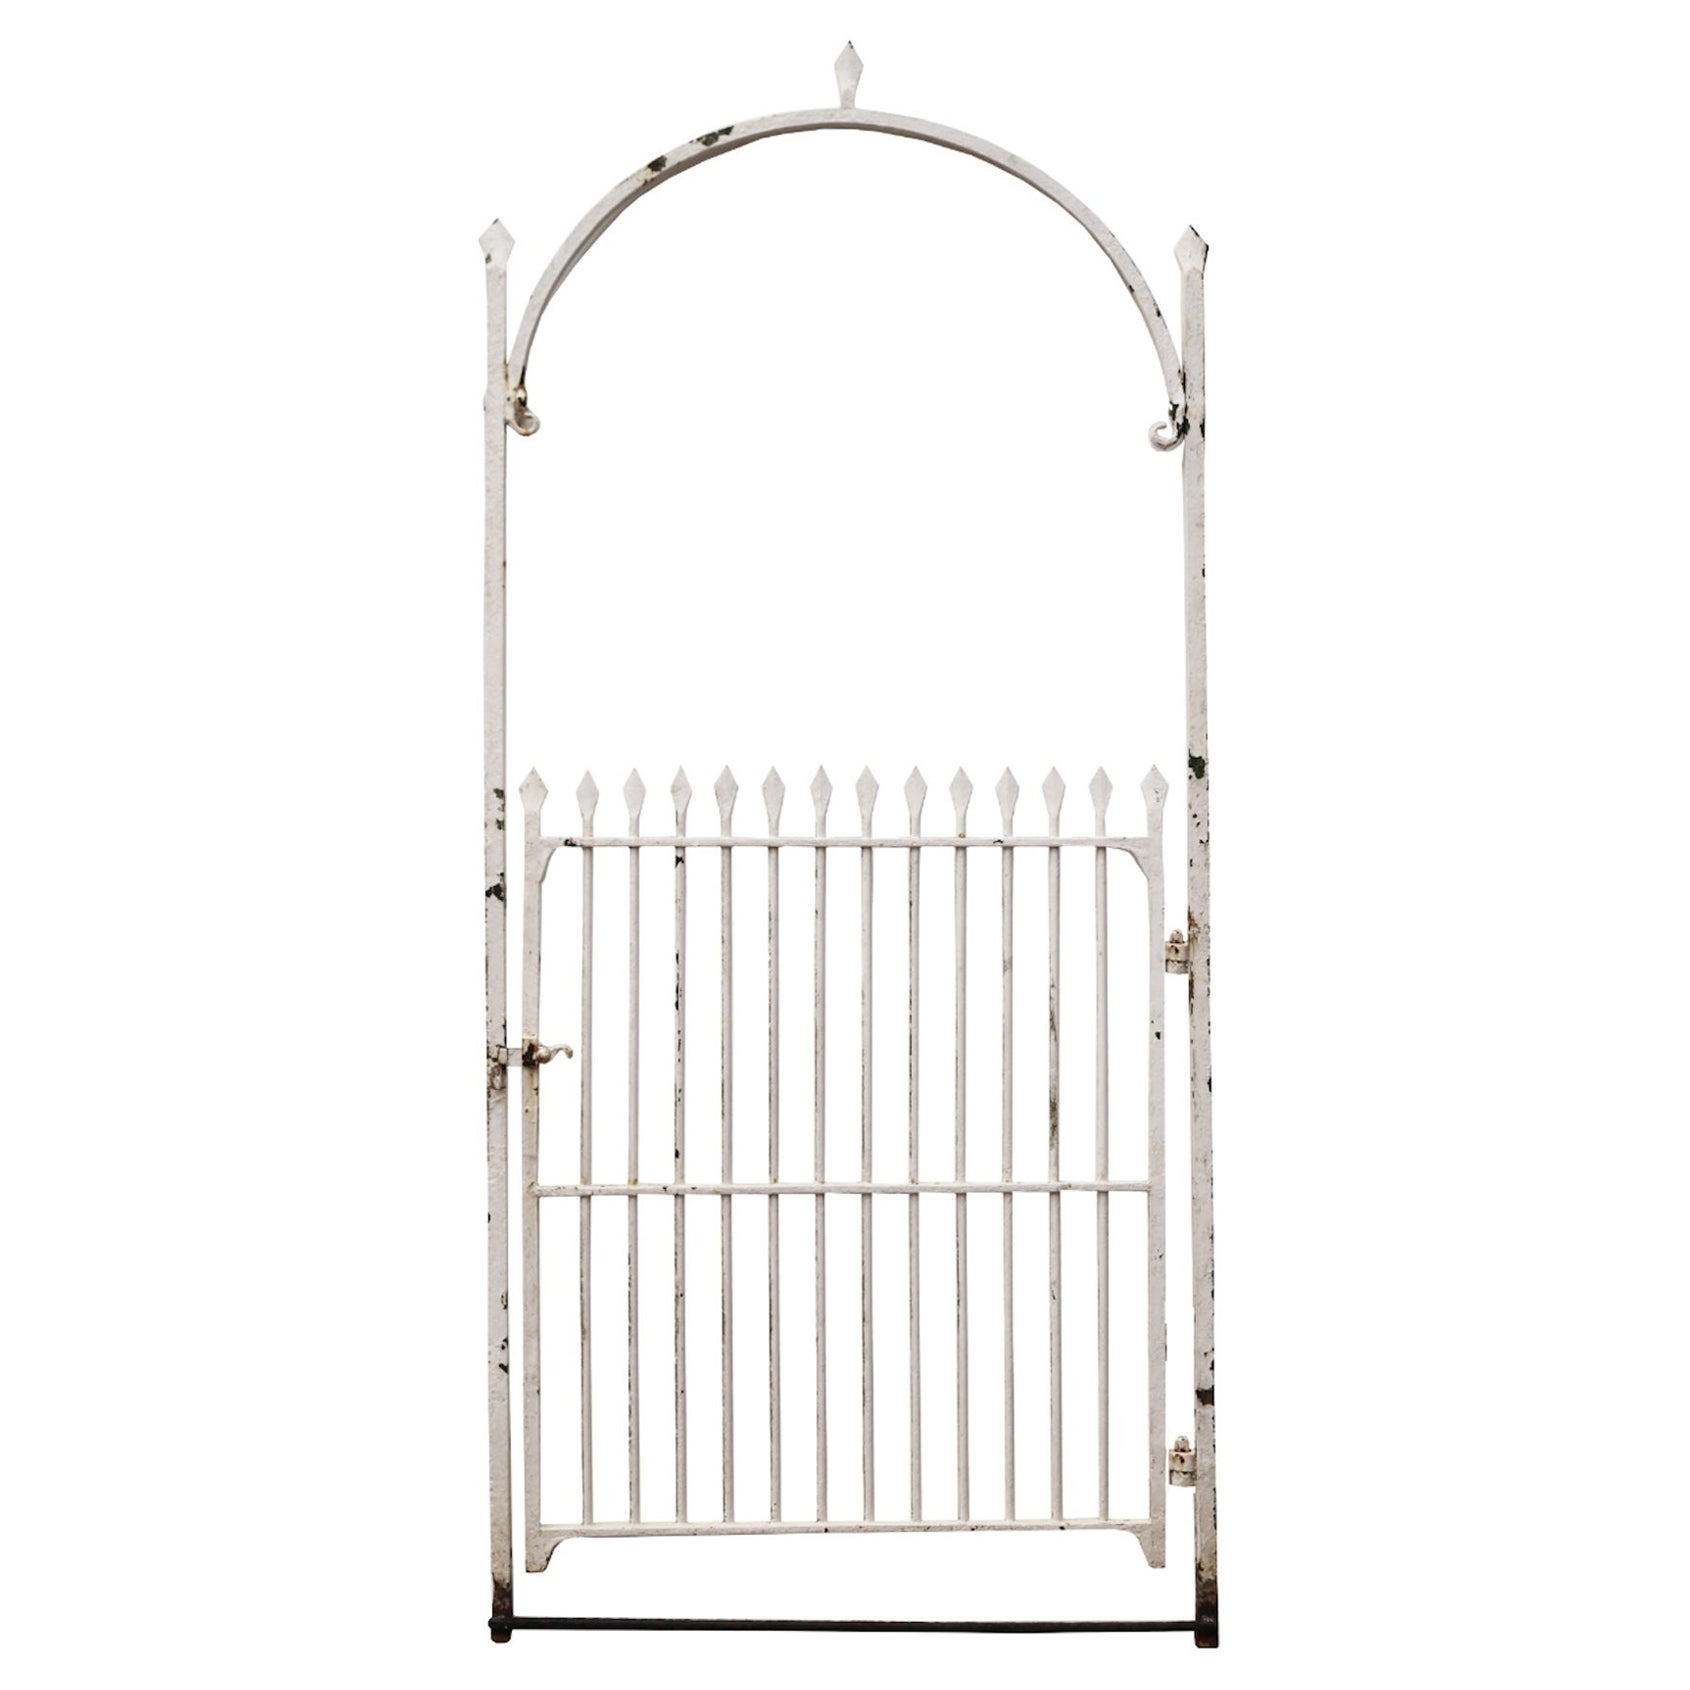 Wrought Iron Reclaimed Gate with Arched Frame For Sale